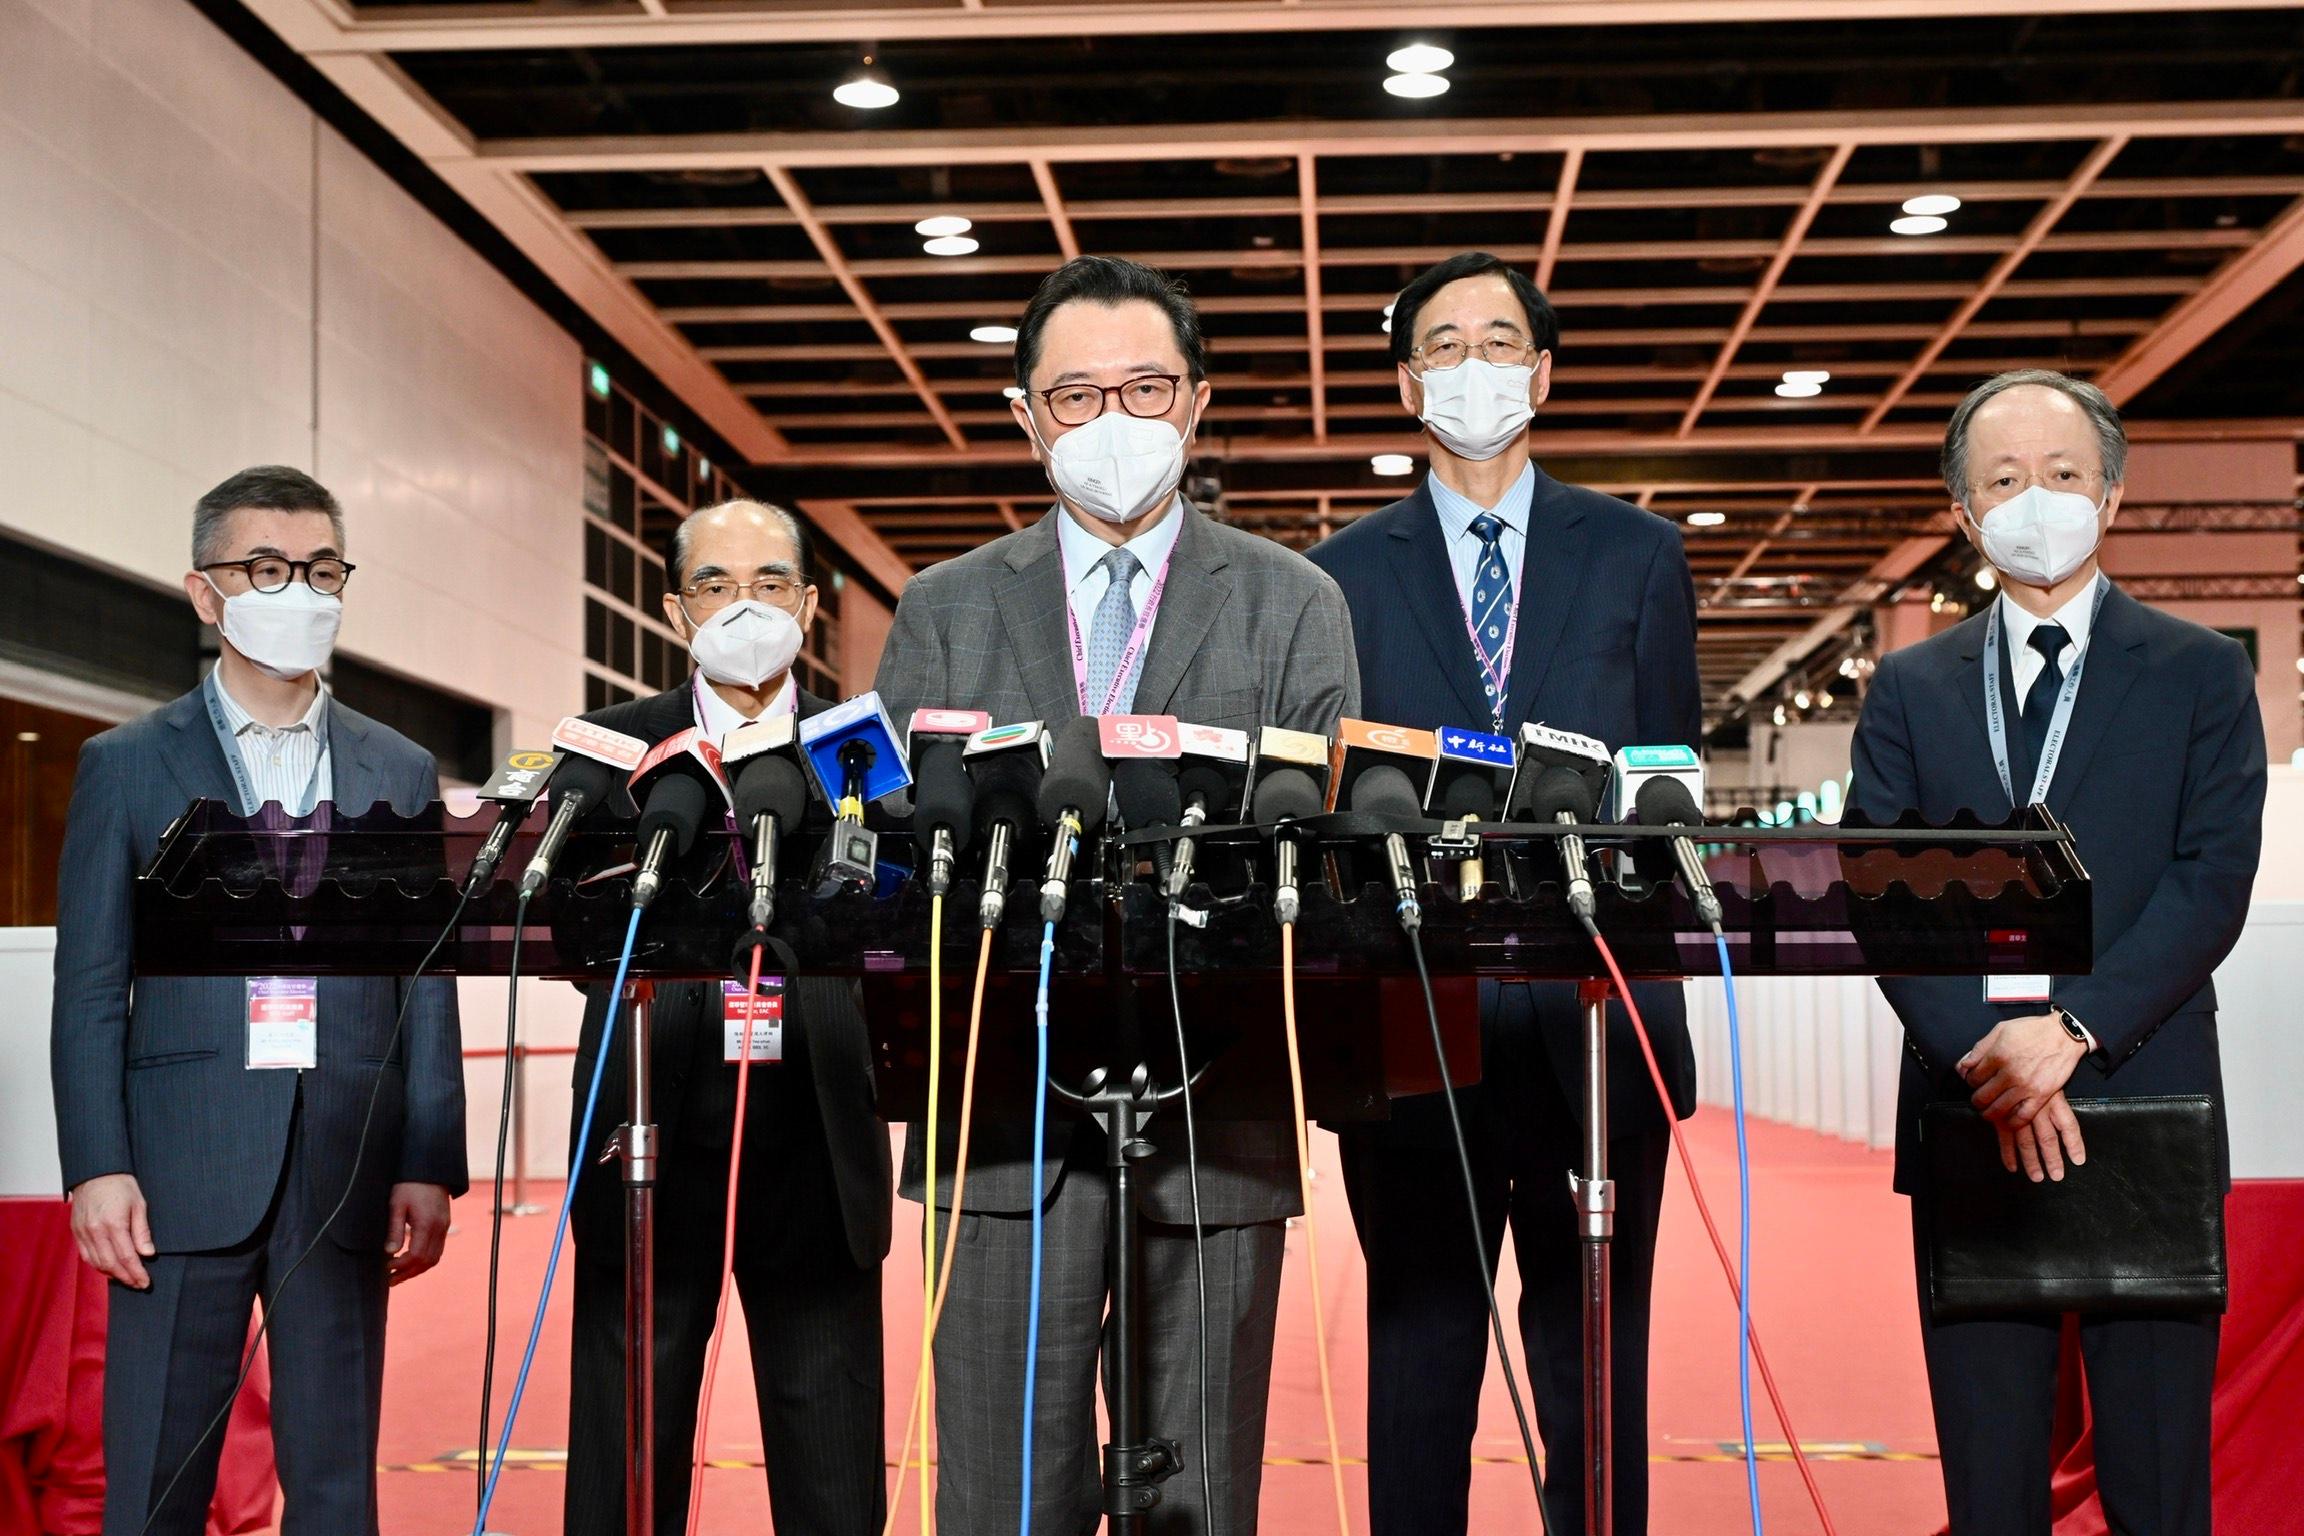 The Chairman of the Electoral Affairs Commission (EAC), Mr Justice Barnabas Fung Wah (centre); EAC members Mr Arthur Luk, SC (second left), and Professor Daniel Shek (second right); the Returning Officer, Mr Justice Keith Yeung Kar-hung (first right); and the Chief Electoral Officer, Mr Raymond Wang (first left), meet the media today (May 7) after visiting the main polling station of the 2022 Chief Executive Election at the Hong Kong Convention and Exhibition Centre in Wan Chai.